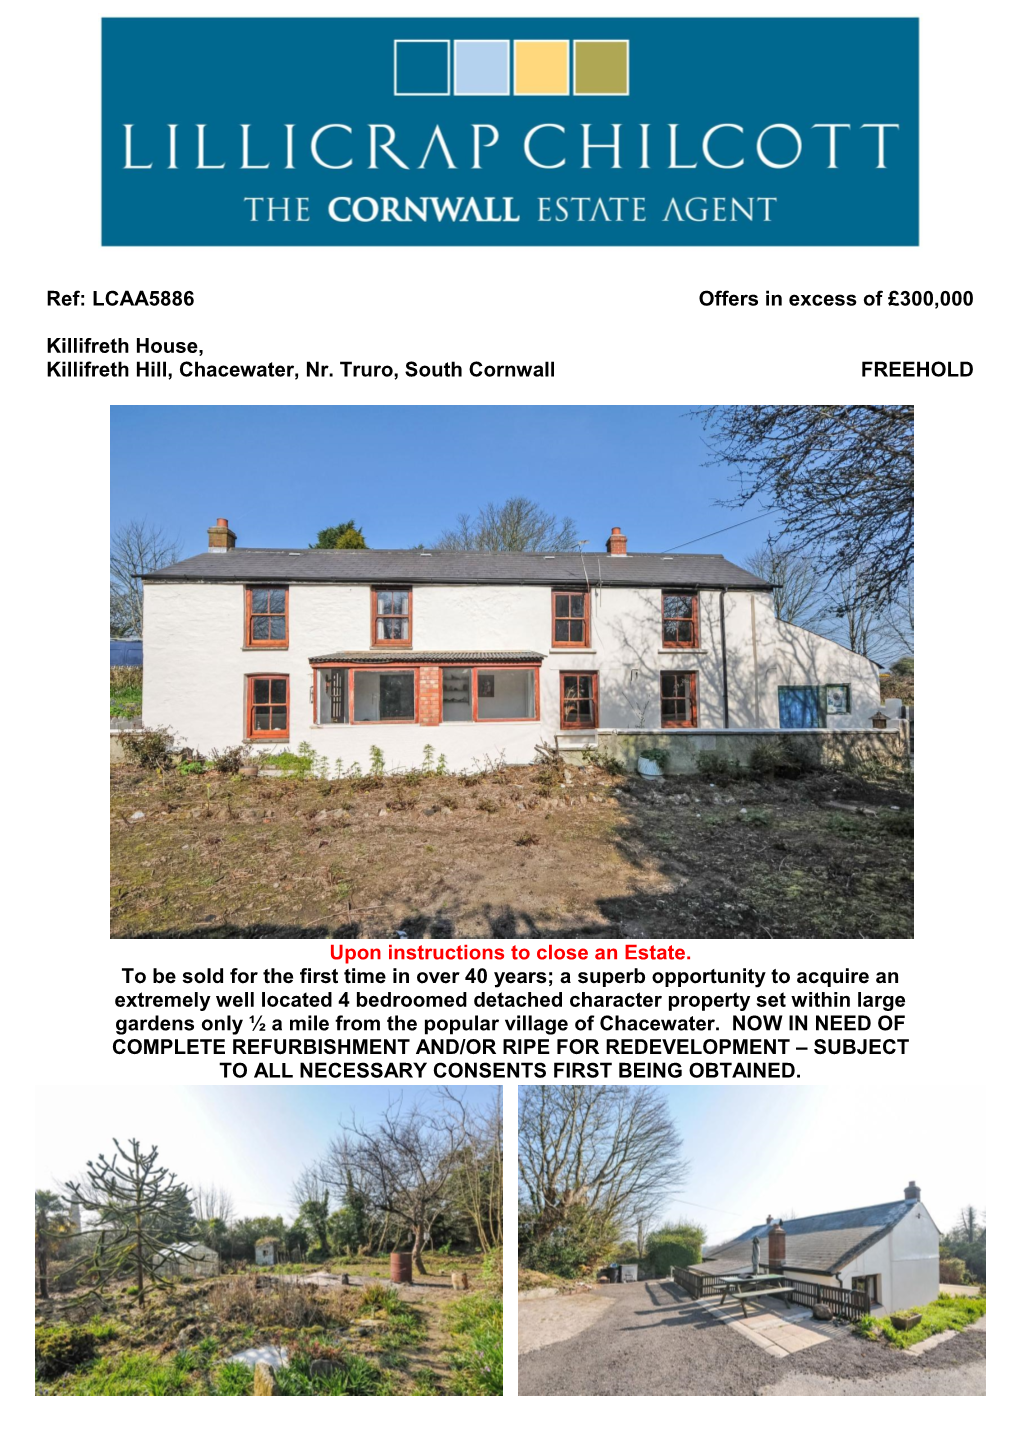 Ref: LCAA5886 Offers in Excess of £300,000